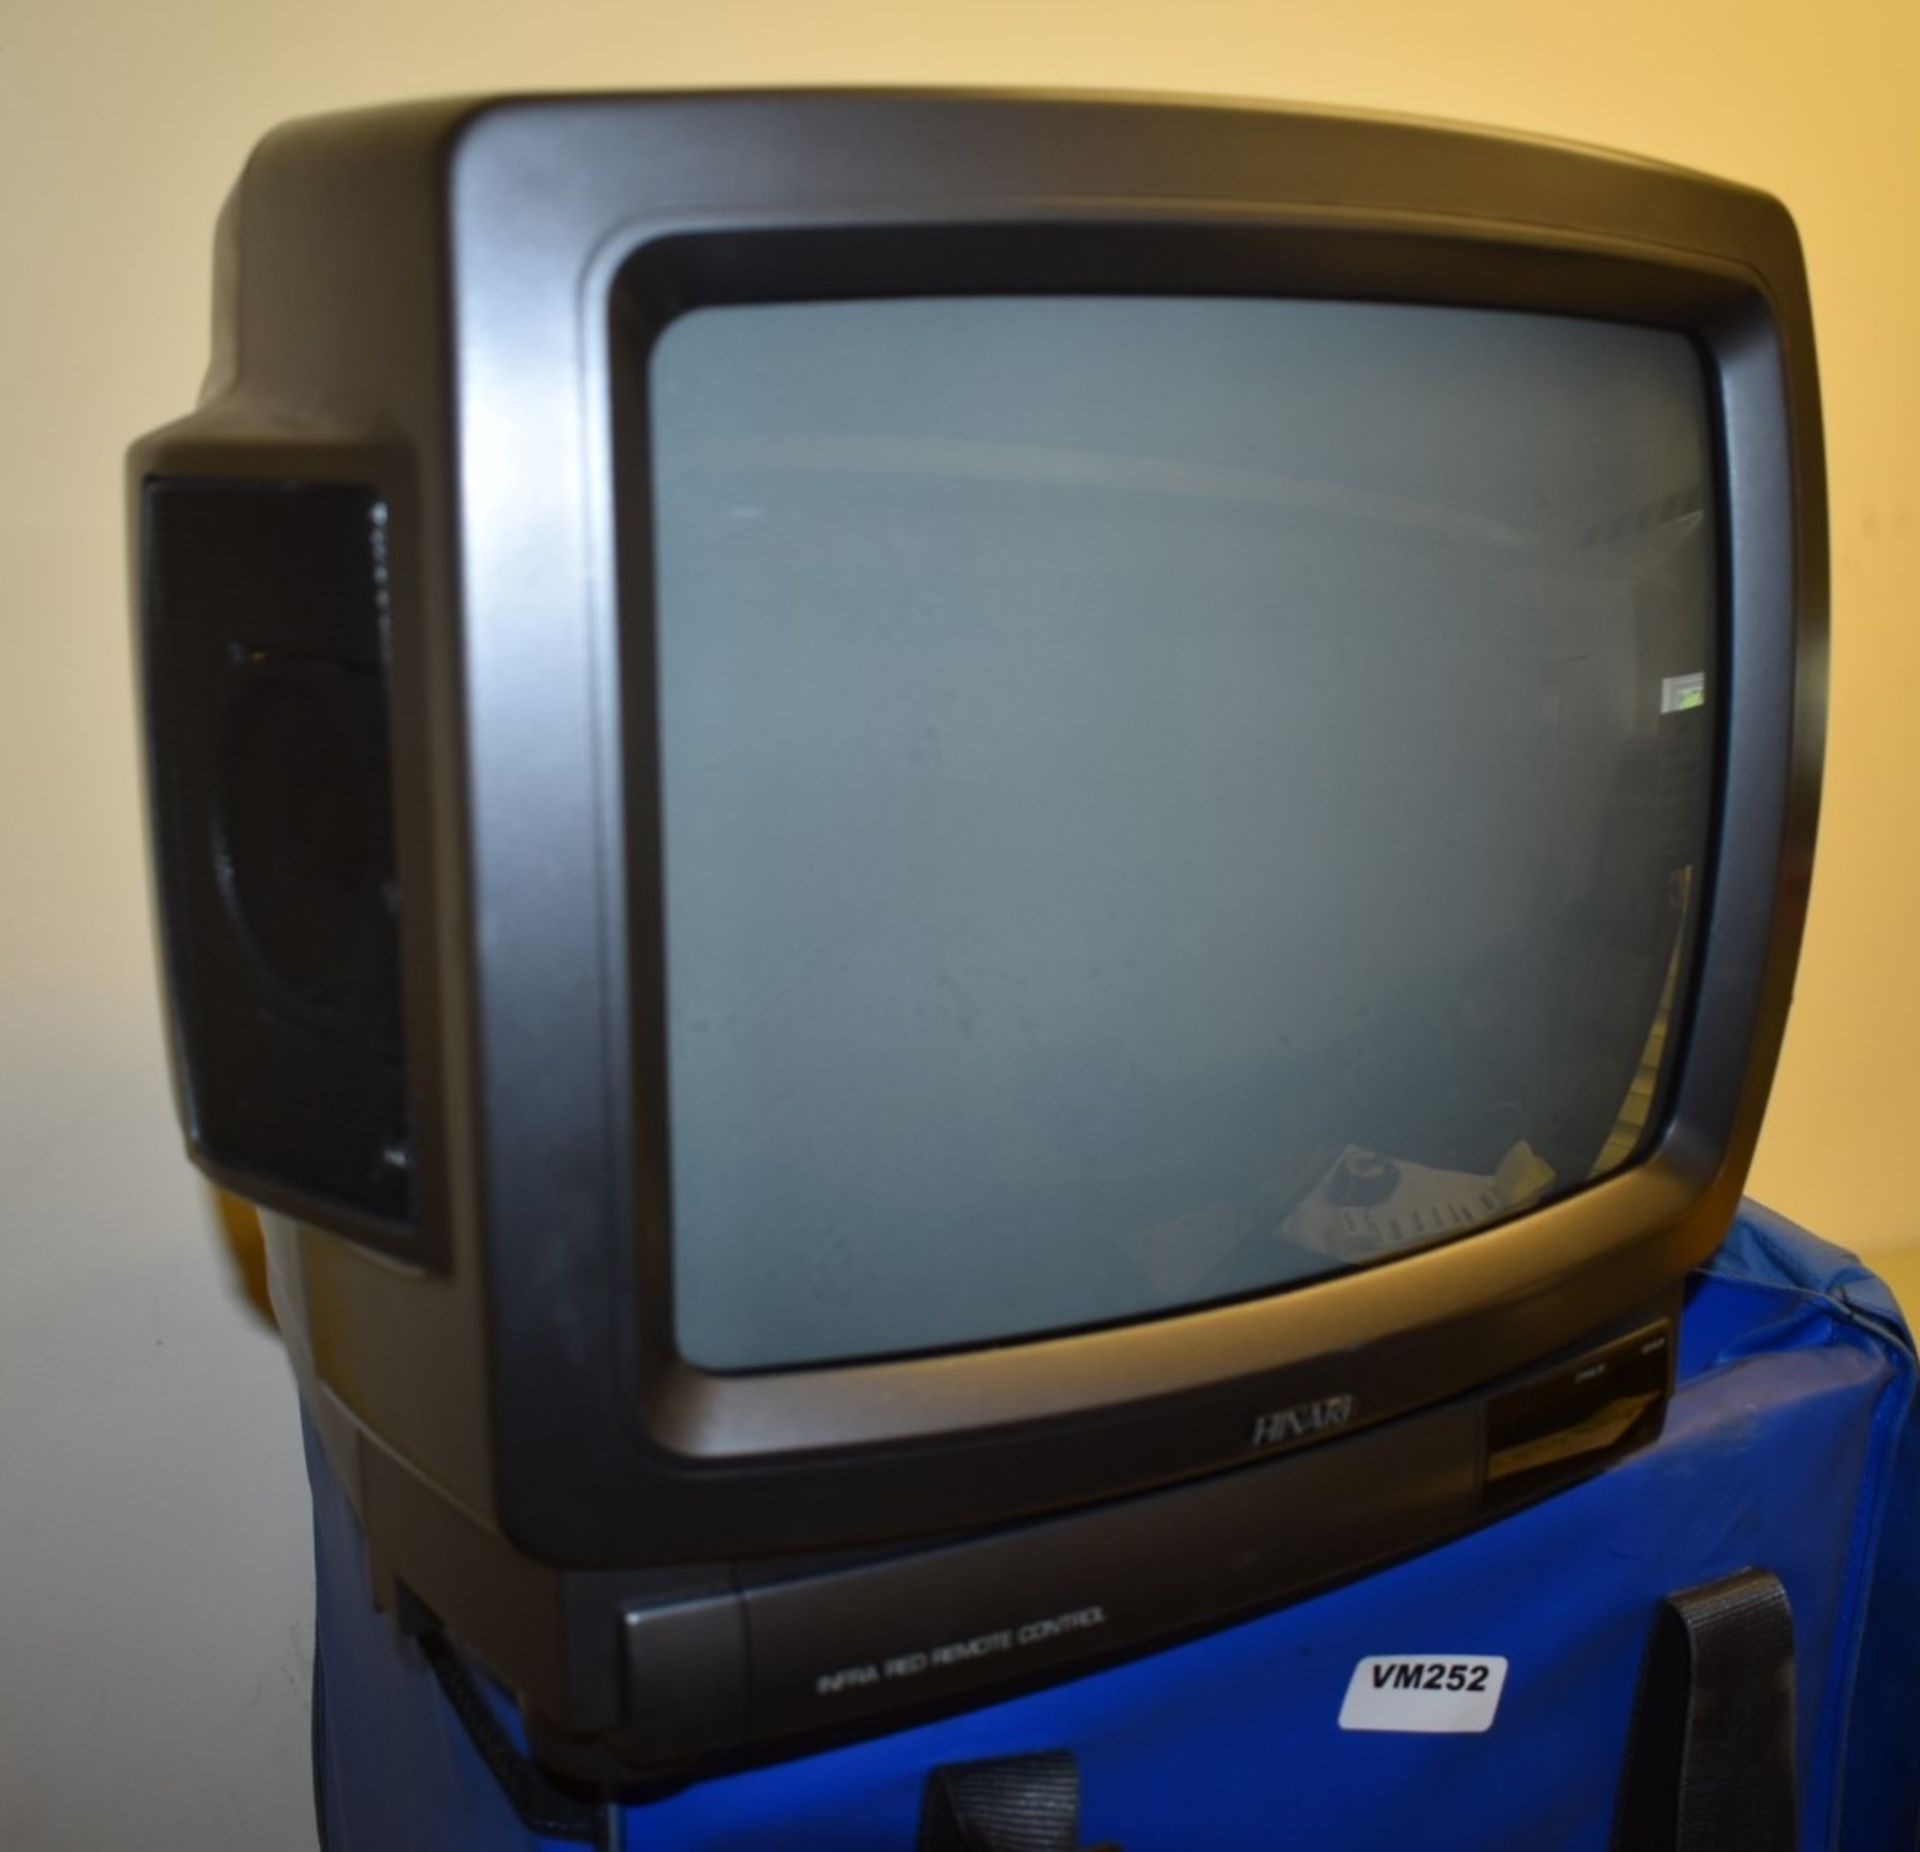 1 x Vintage Hinari Portable TV With Two Protection Carry Cases - Ref VM252 IT - CL409 - Location: